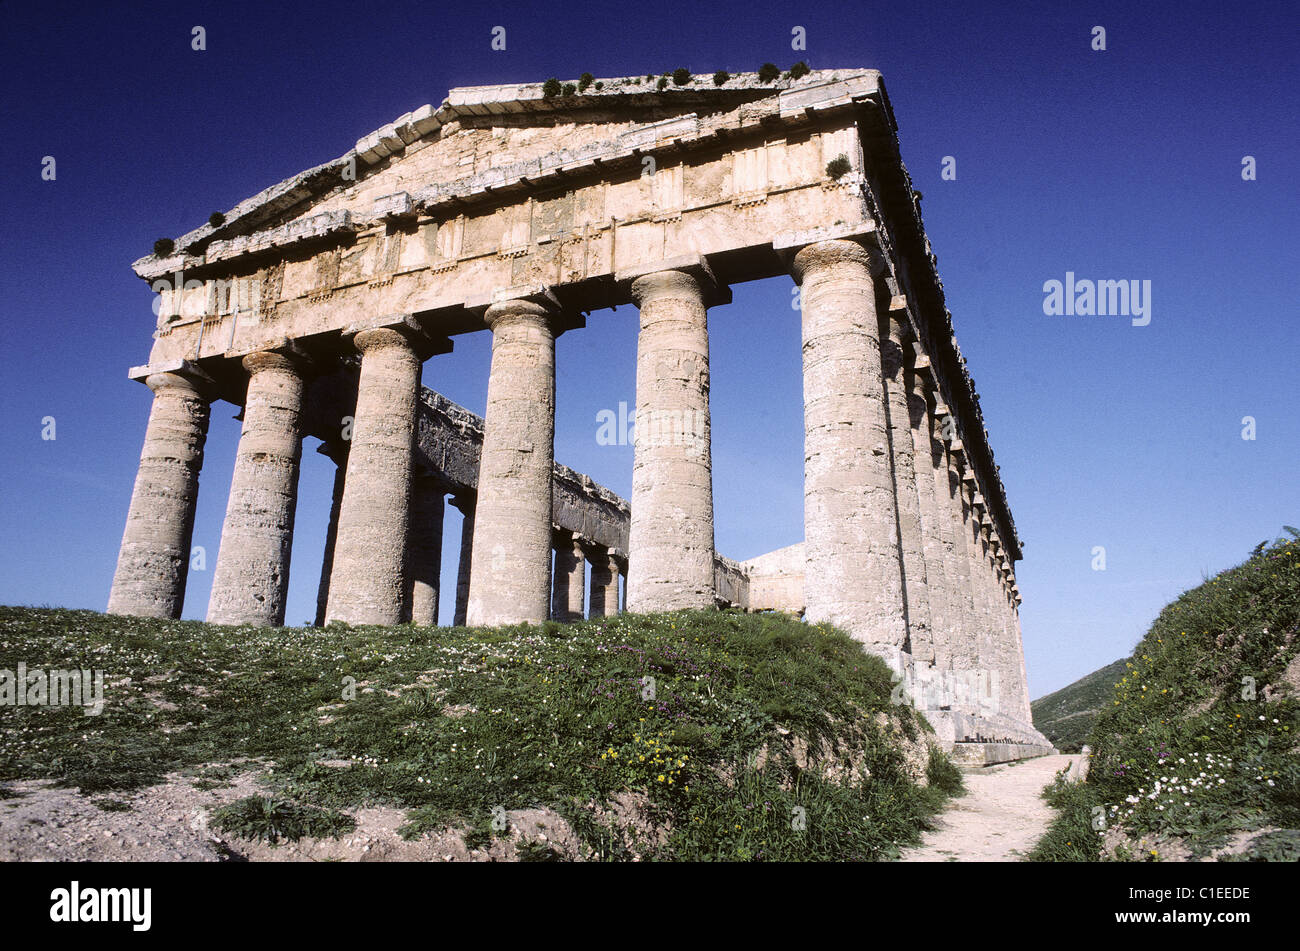 Italy, Sicily, Segesta archeological site, Doric temple built in 430 BC Stock Photo